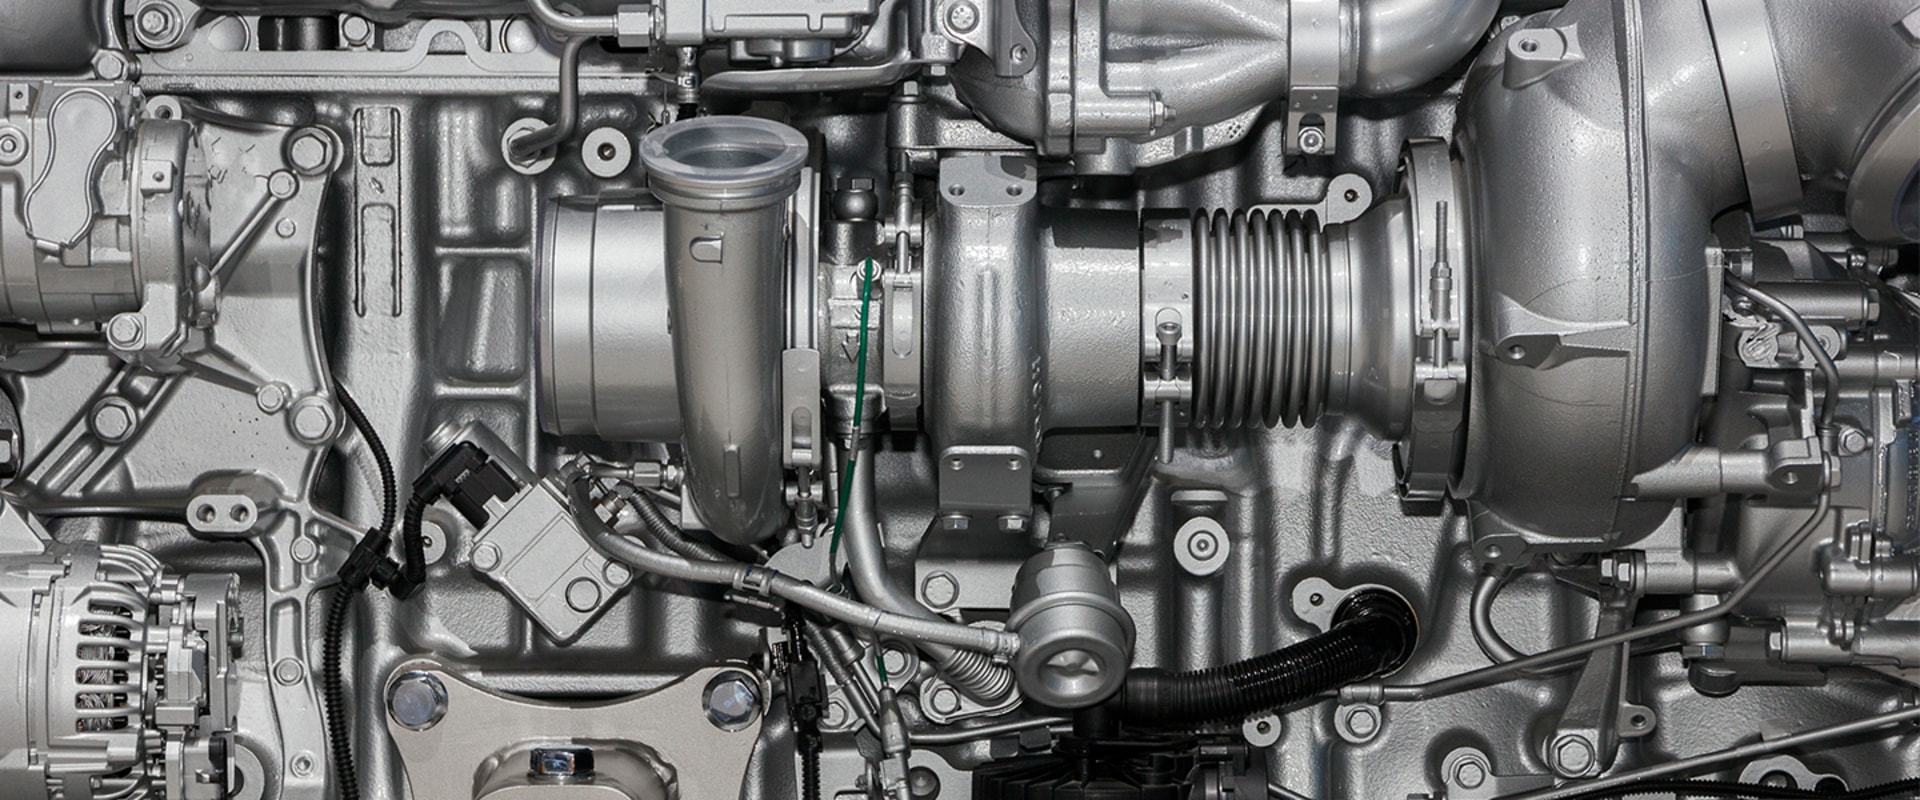 What material is a diesel engine?